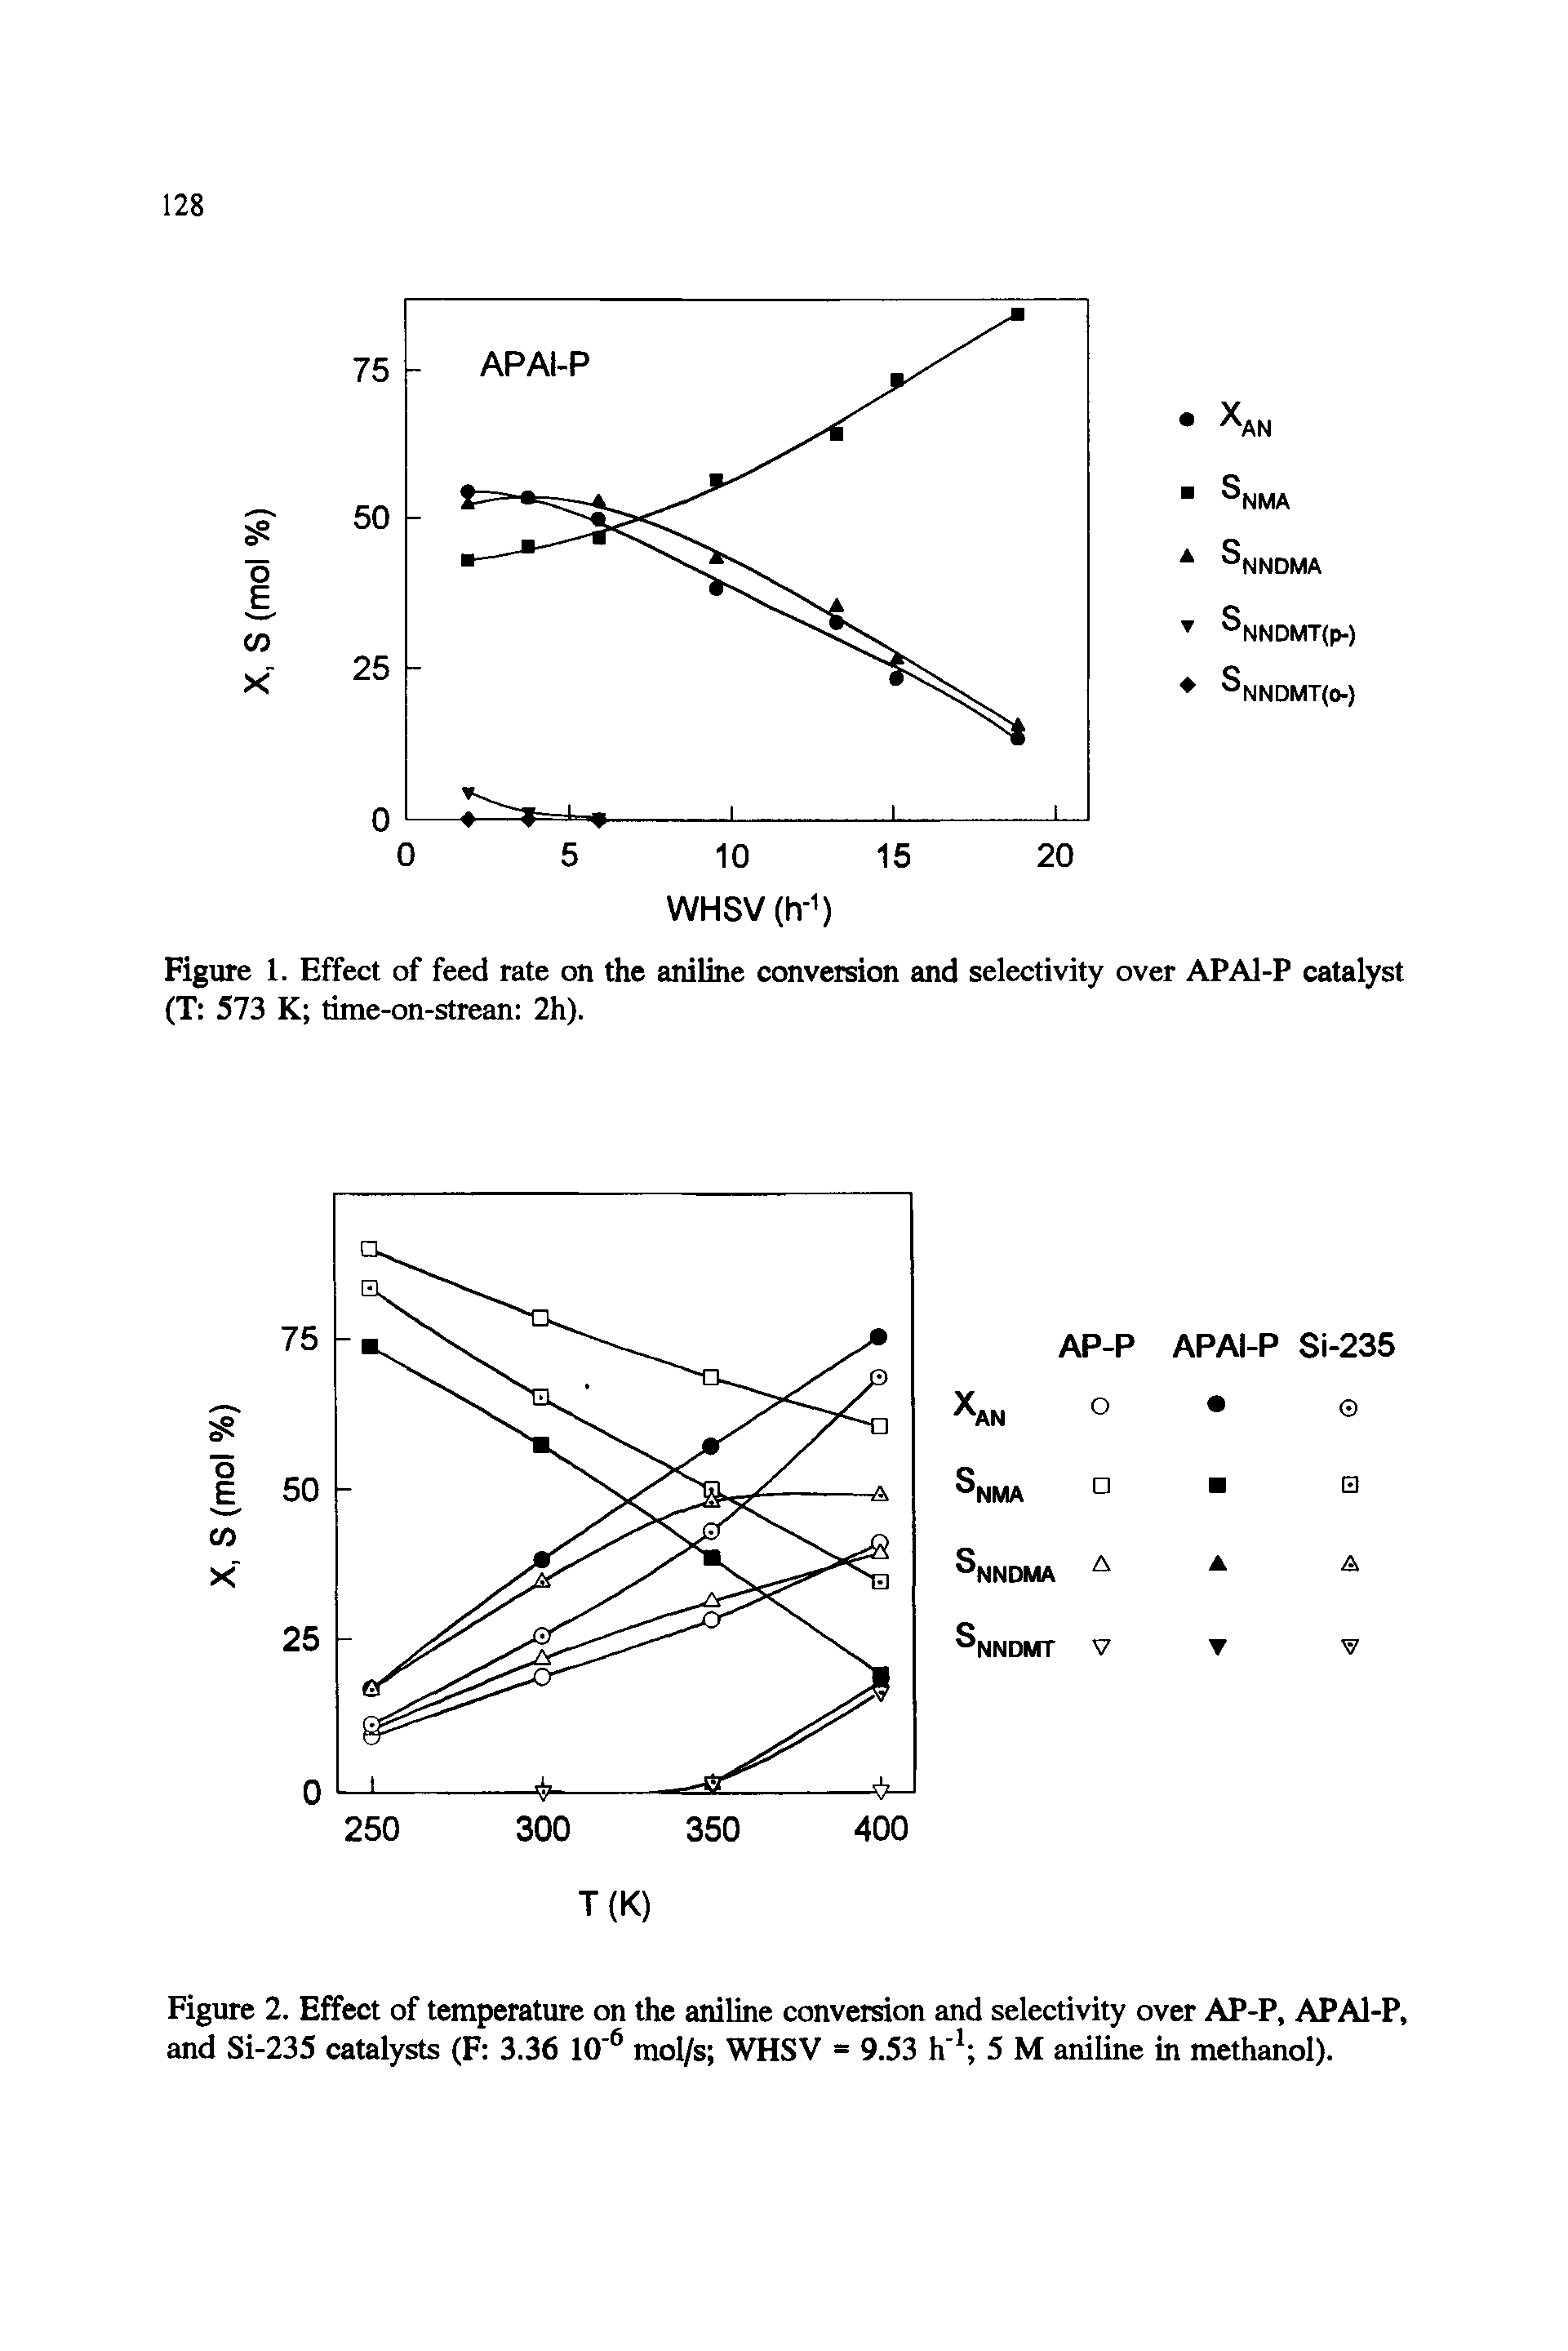 Figure 2. Effect of temperature on the aniline conversion and selectivity over AP-P, APAl-P, and Si-235 catalysts (F 3.36 10 mol/s WHSV = 9.53 h 5 M aniline in methanol).